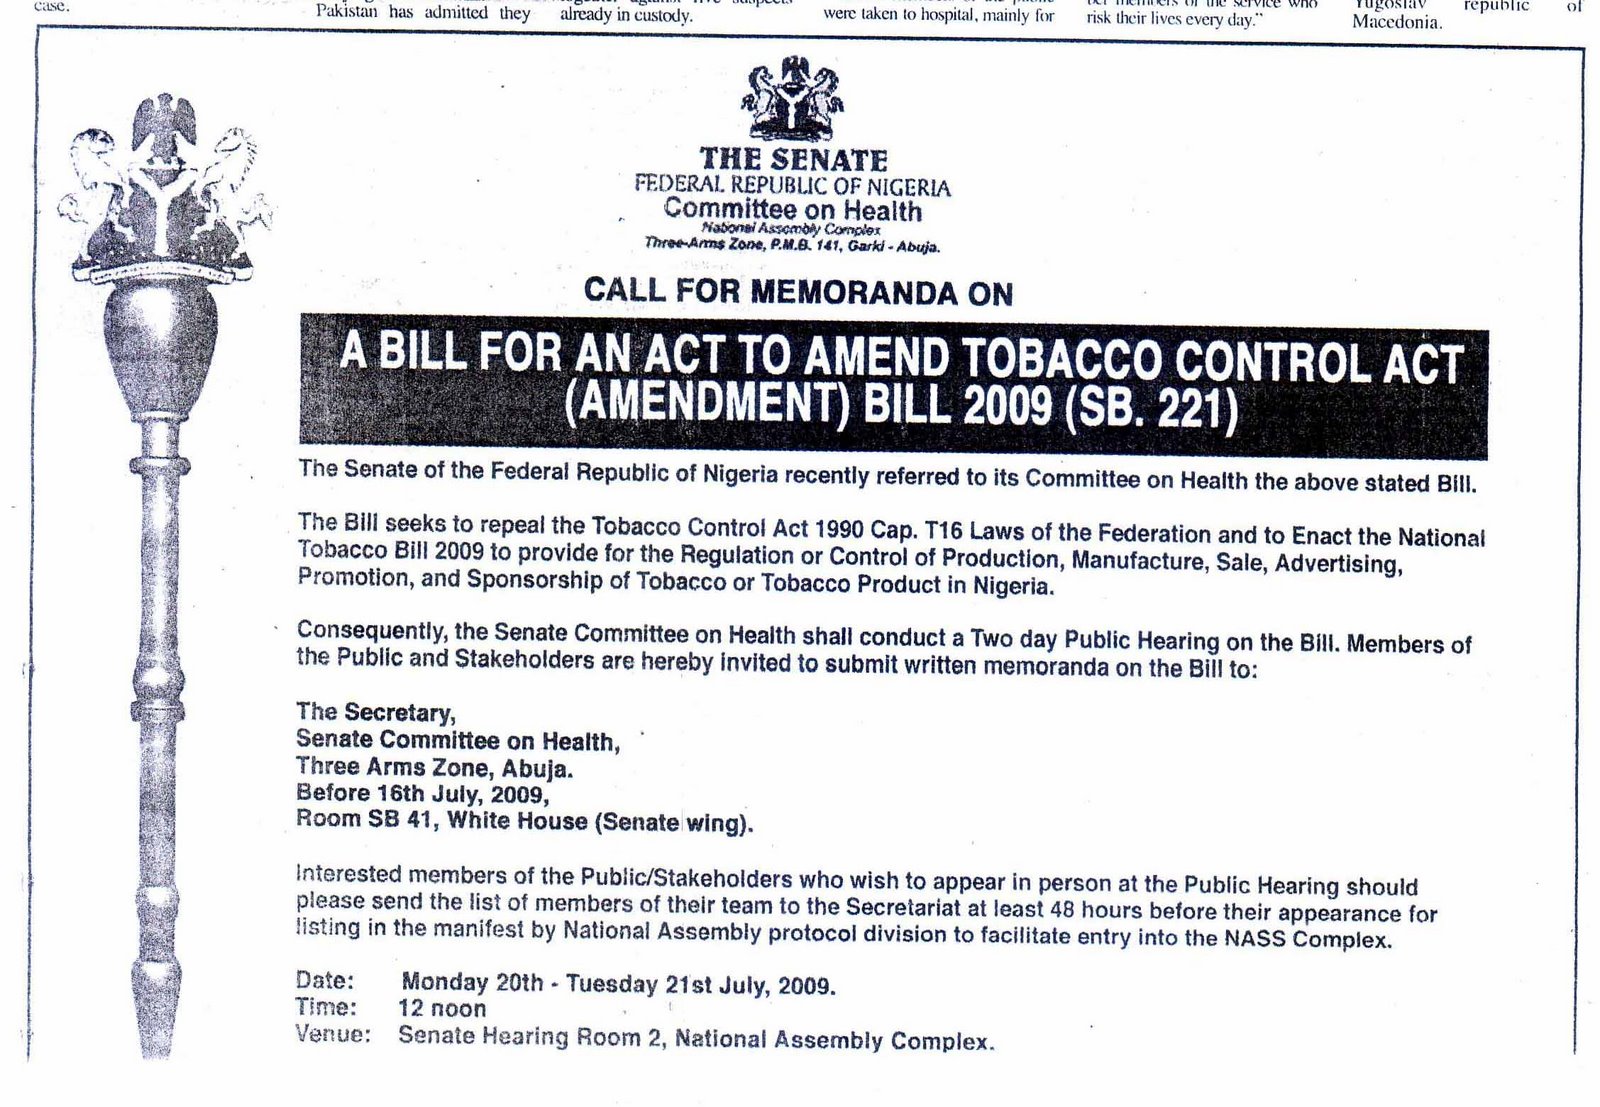 [A+Bill+for+an+act+to+amend+tobacco+act+2.jpg]